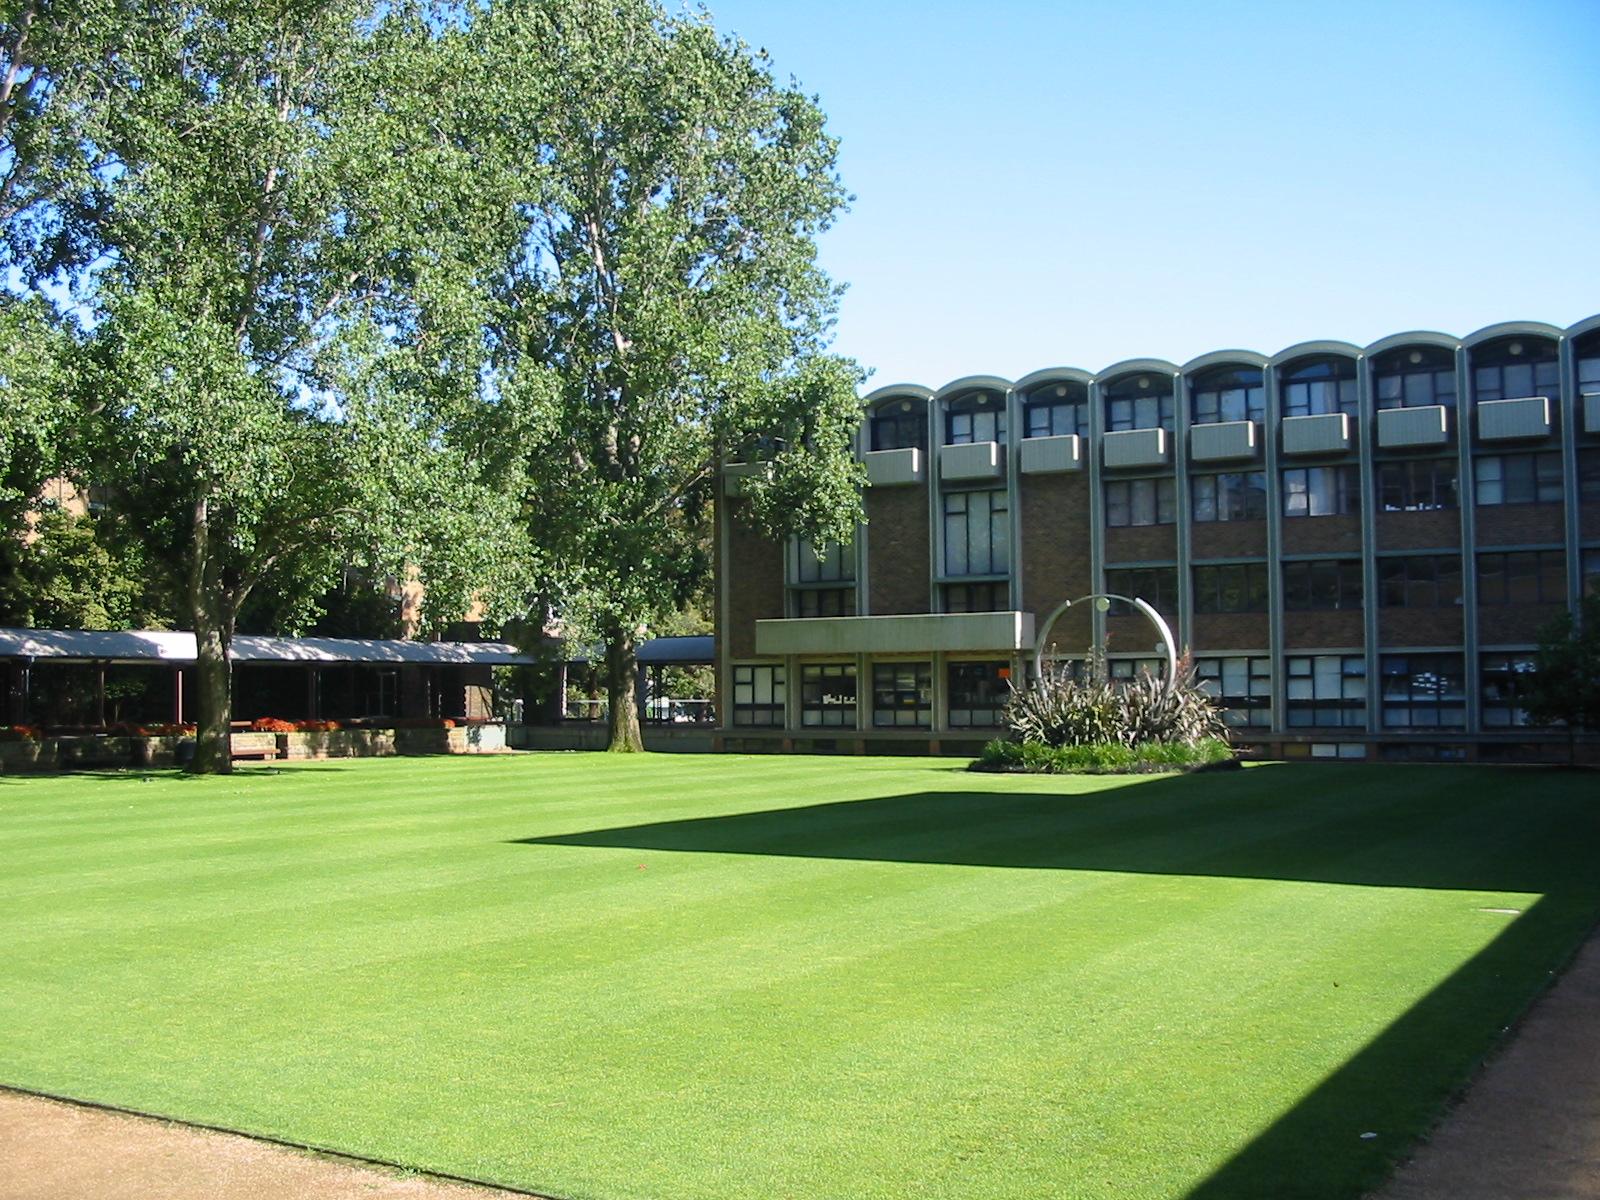 Library Lawn on upper campus